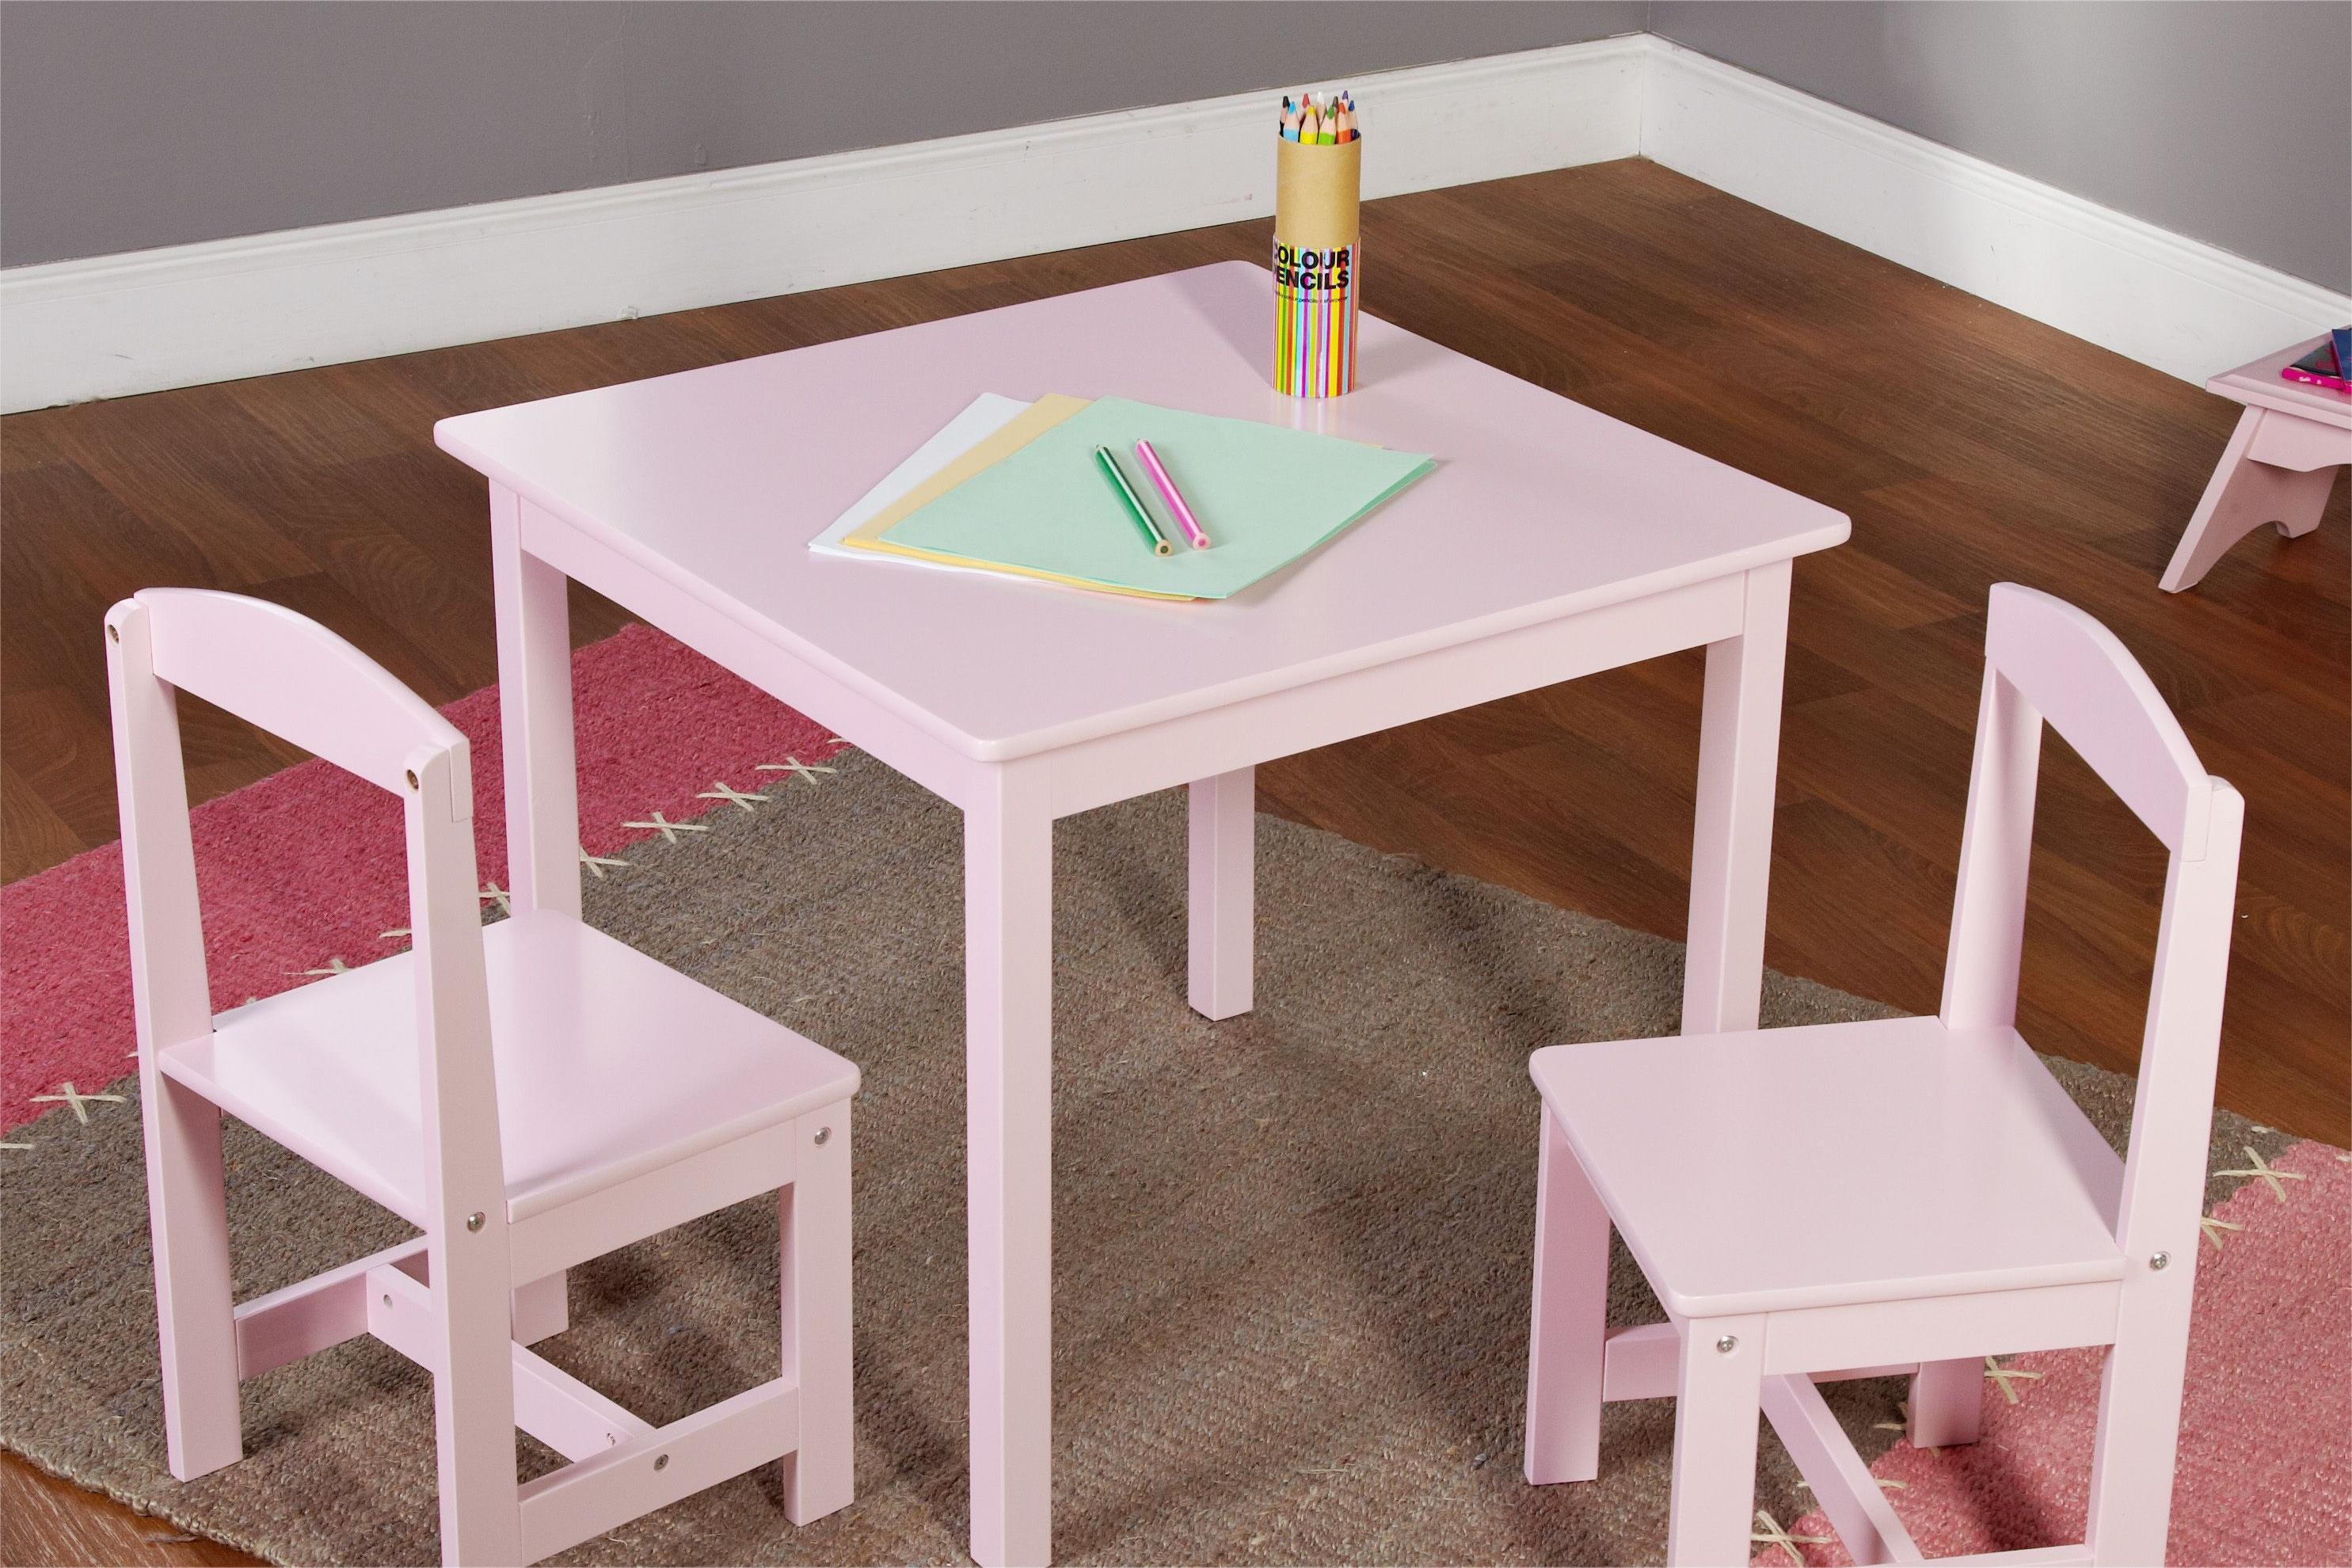 Comparison Of Children's Furniture With Different Materials